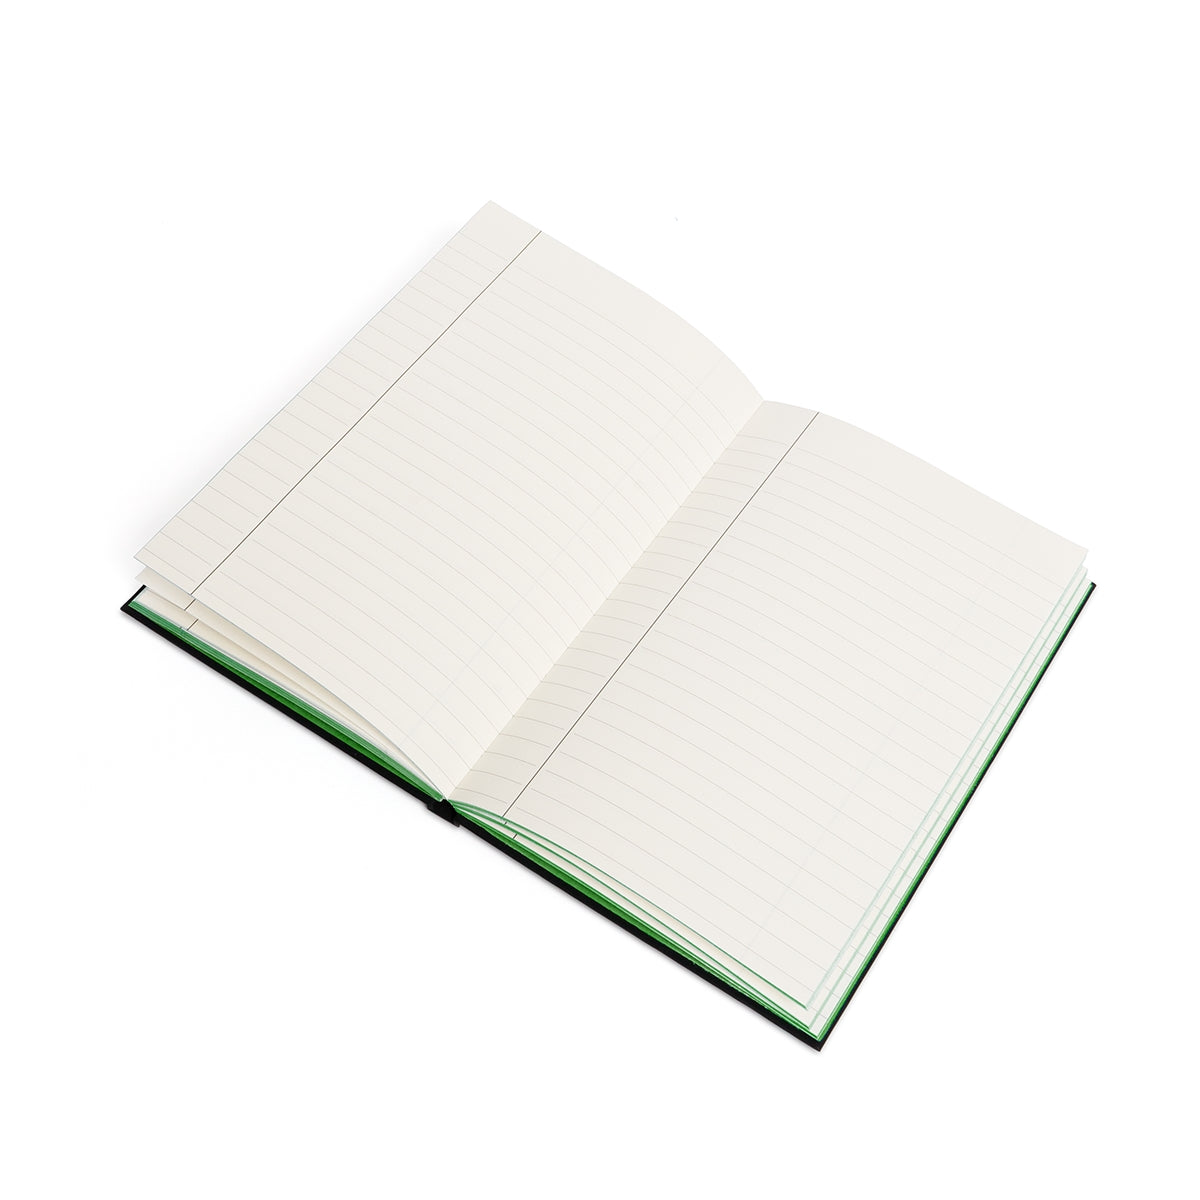 Earth & Sea Color Contrast Notebook - Ruled